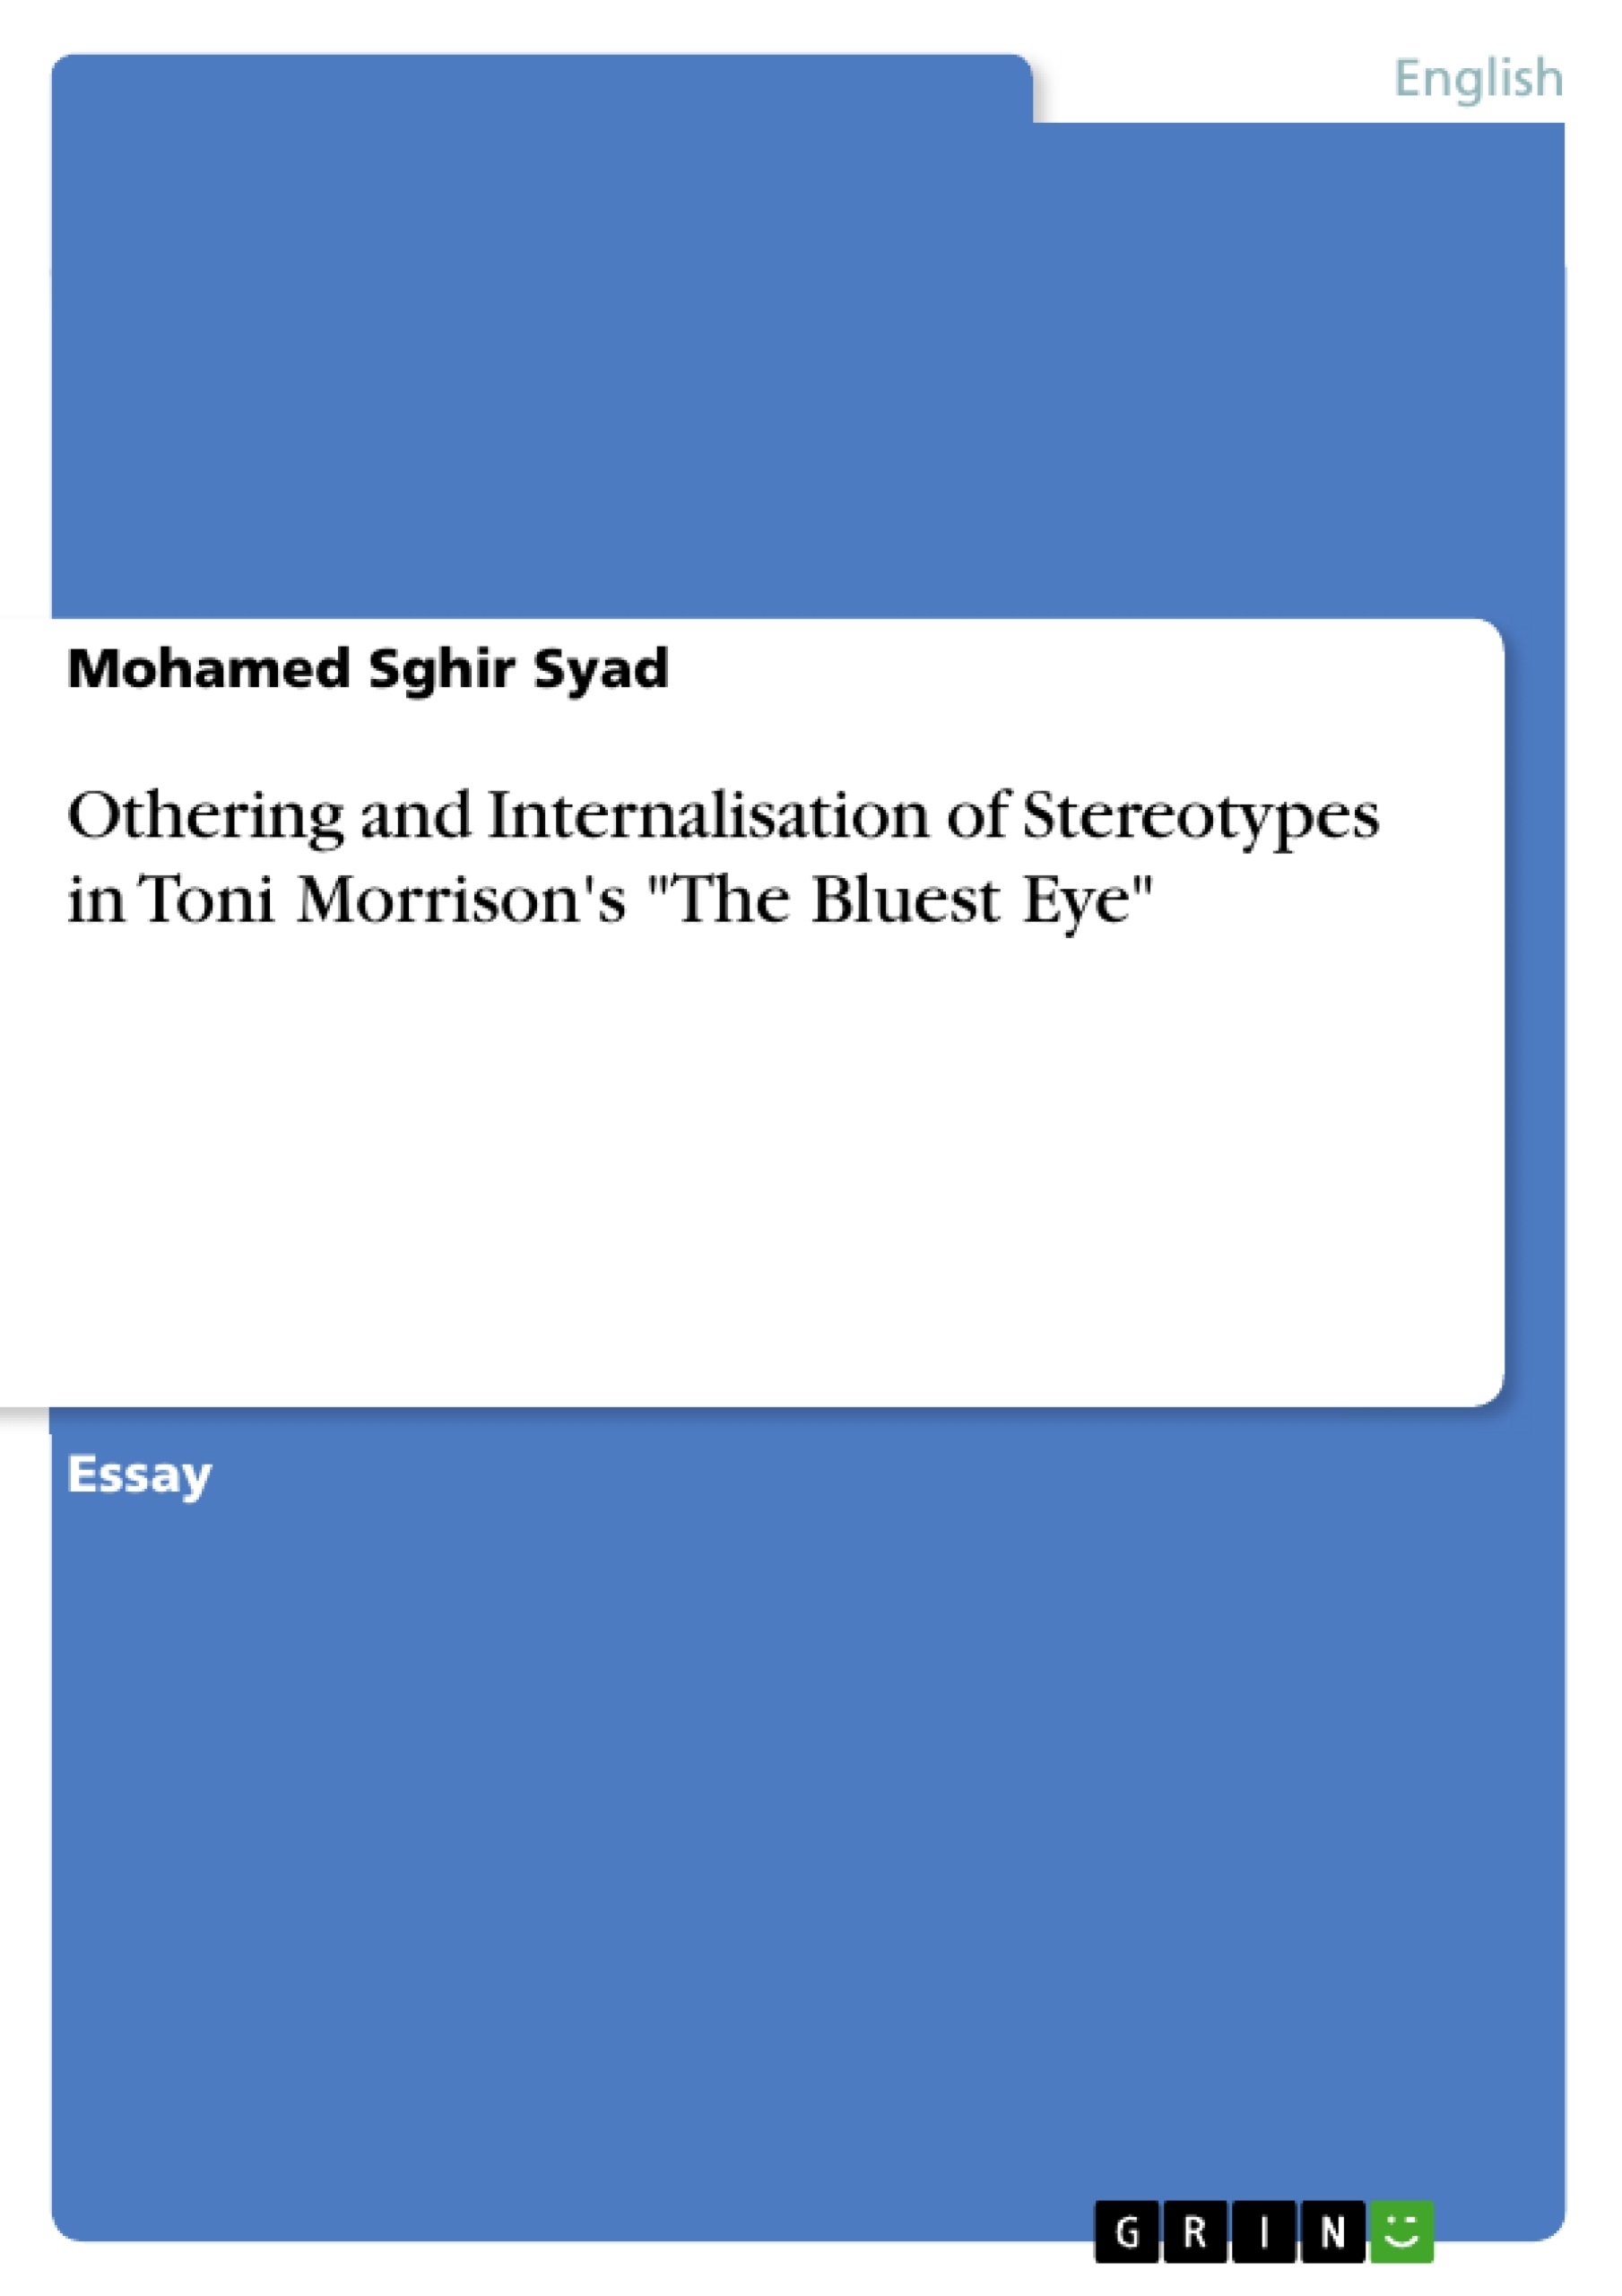 Título: Othering and Internalisation of Stereotypes in Toni Morrison's "The Bluest Eye"